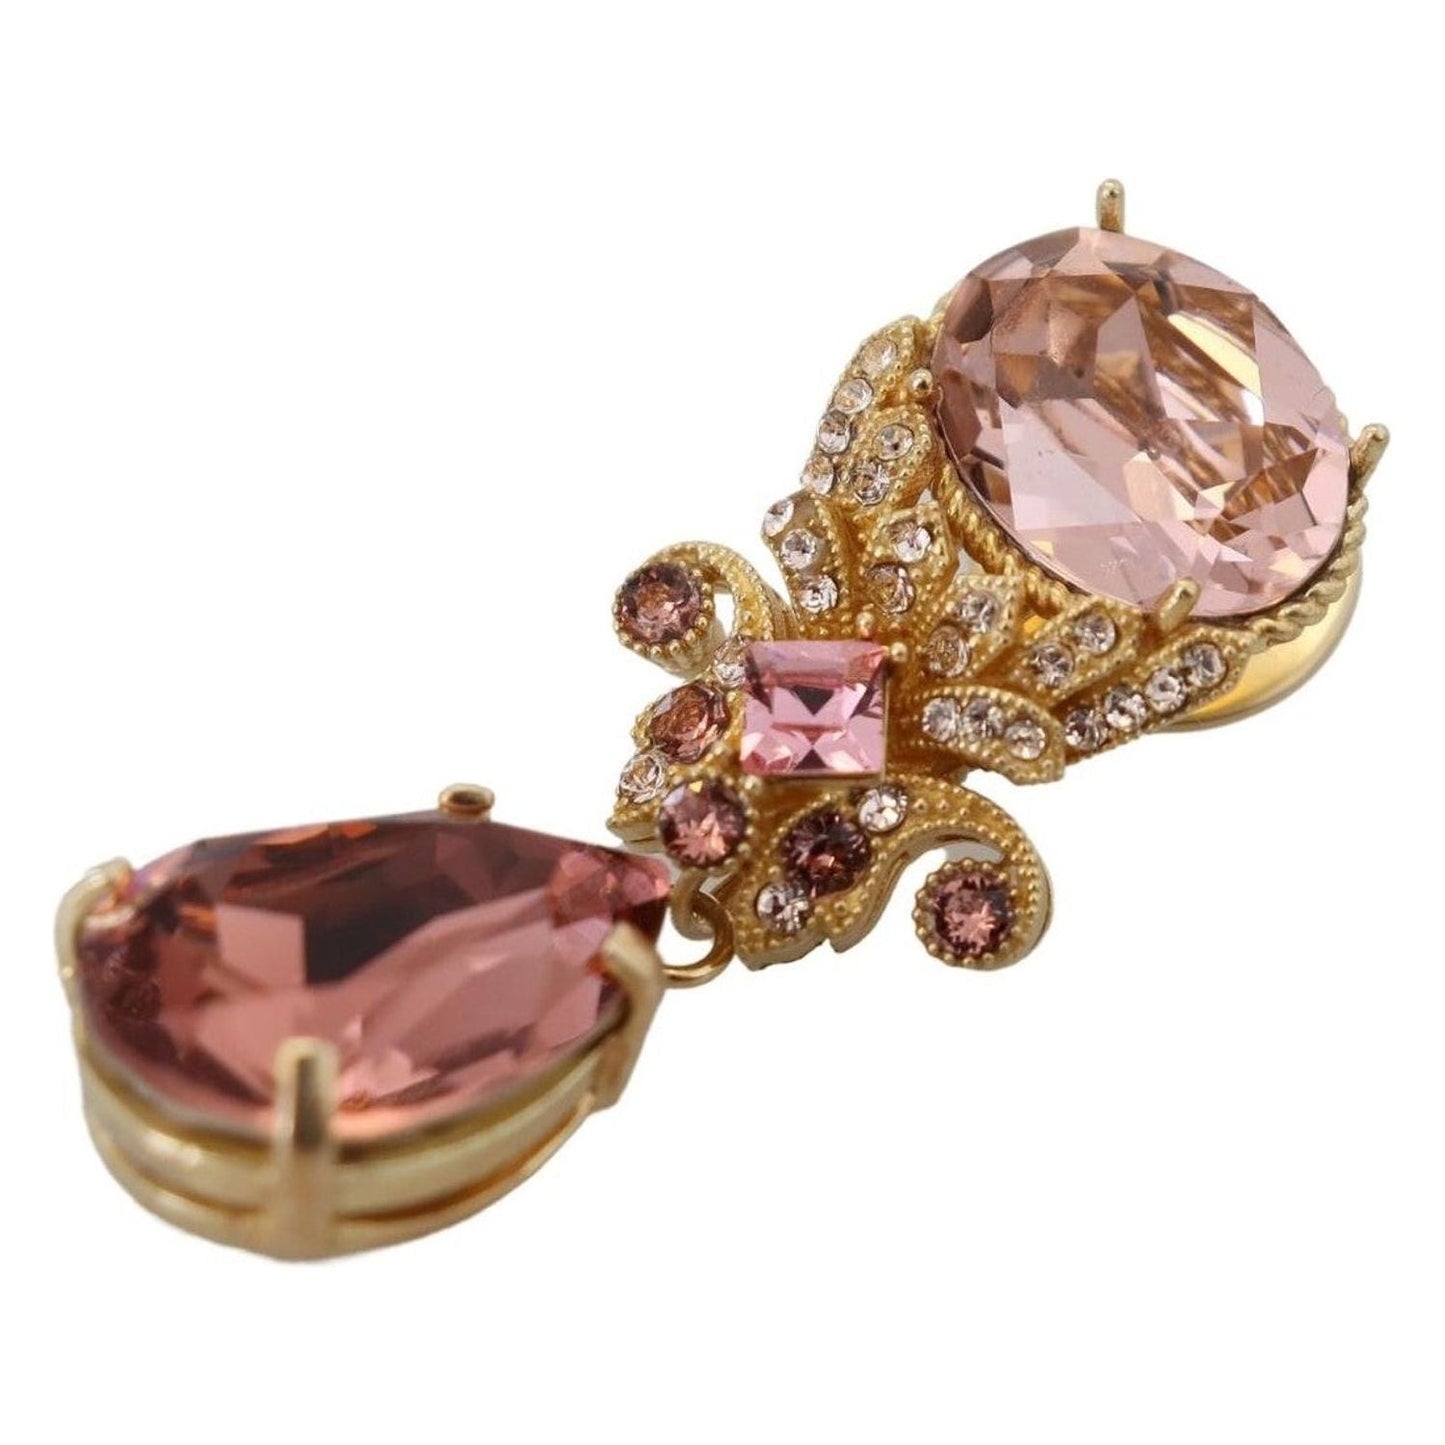 Dolce & Gabbana Exquisite Gold-Toned Crystal Brooch gold-tone-brass-crystal-jewelry-dangling-pin-brooch